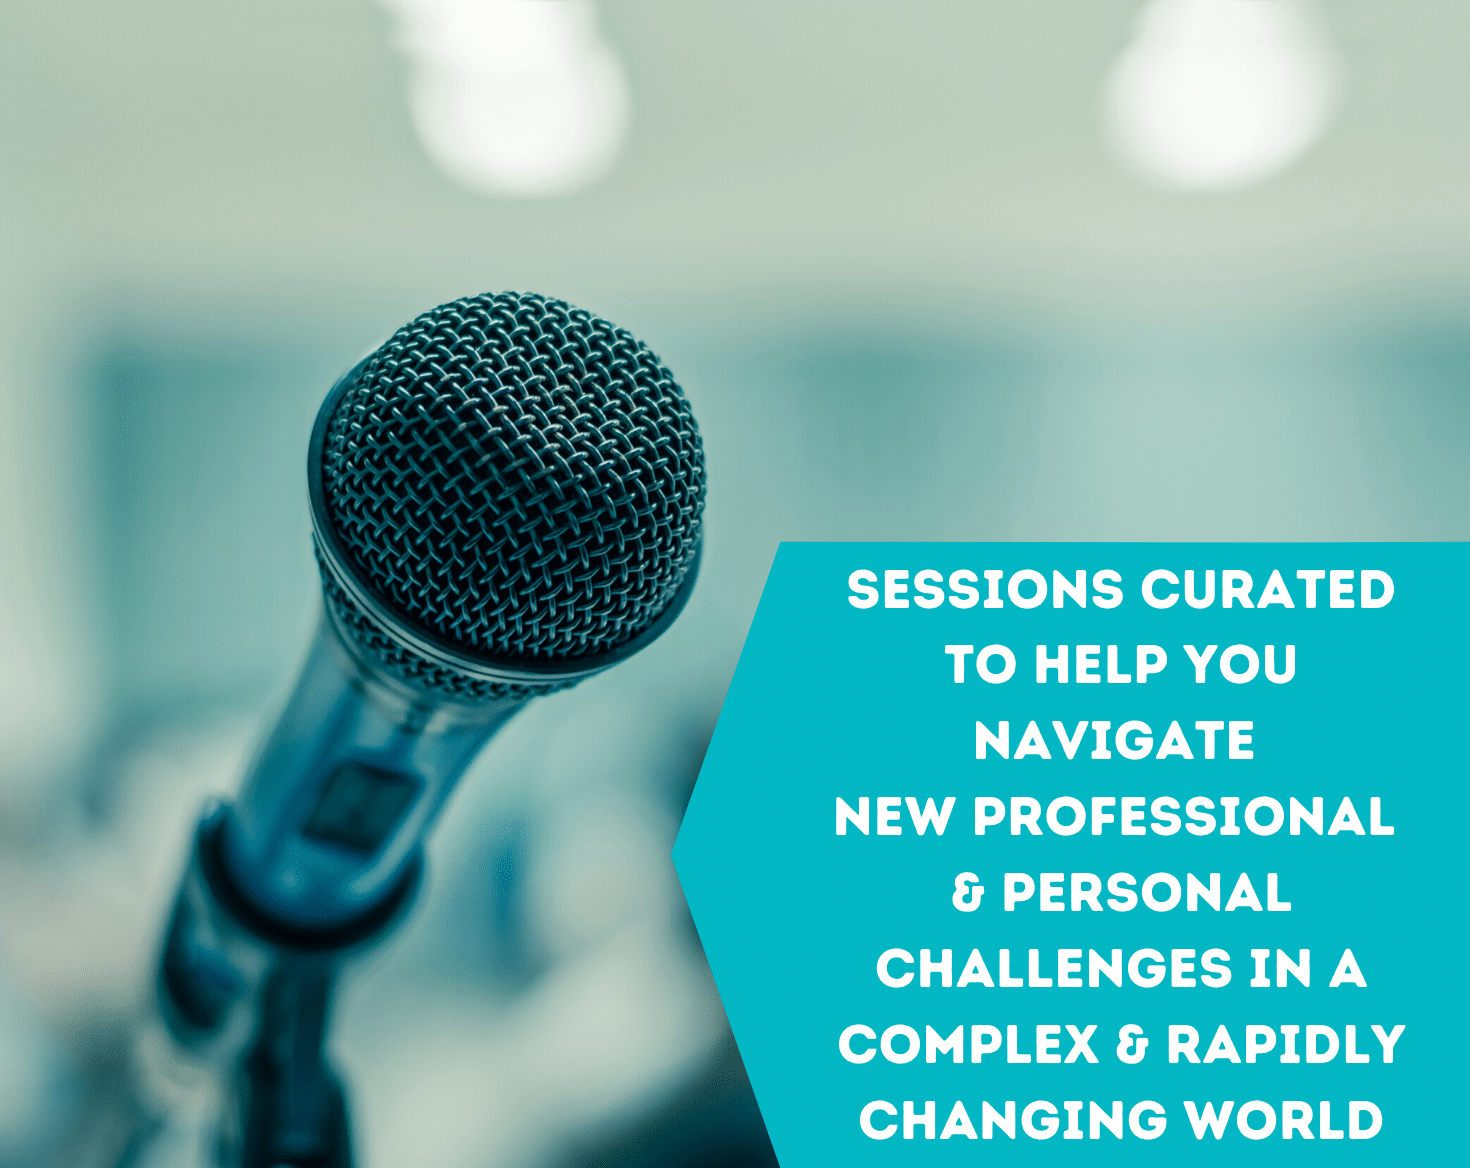 Sessions curated to help you navigate new professional and personal challenges in a complex and rapidly changing world